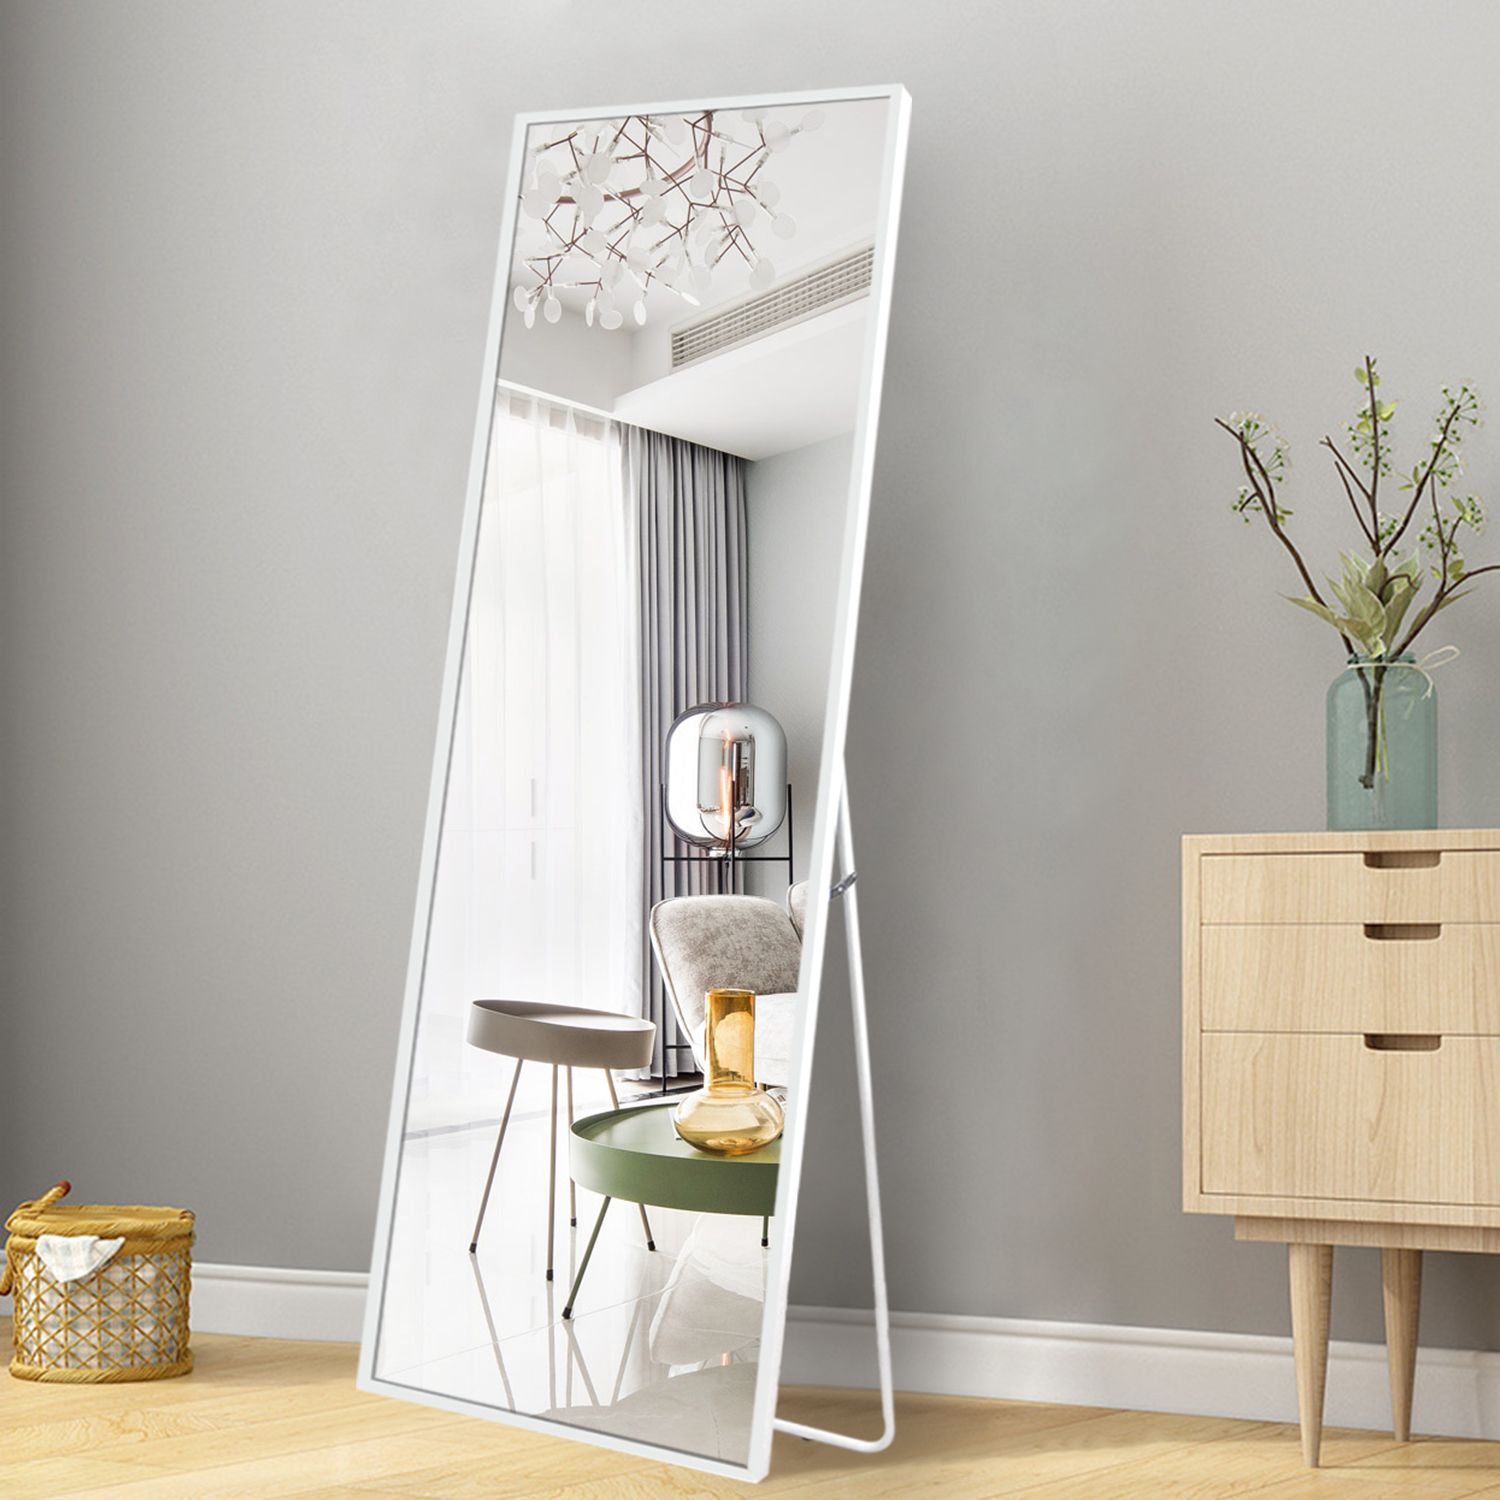 Neutype 65" X 22" White Full Length Mirror With Standing Holder Floor Throughout Full Length Wall Mirrors (View 5 of 15)